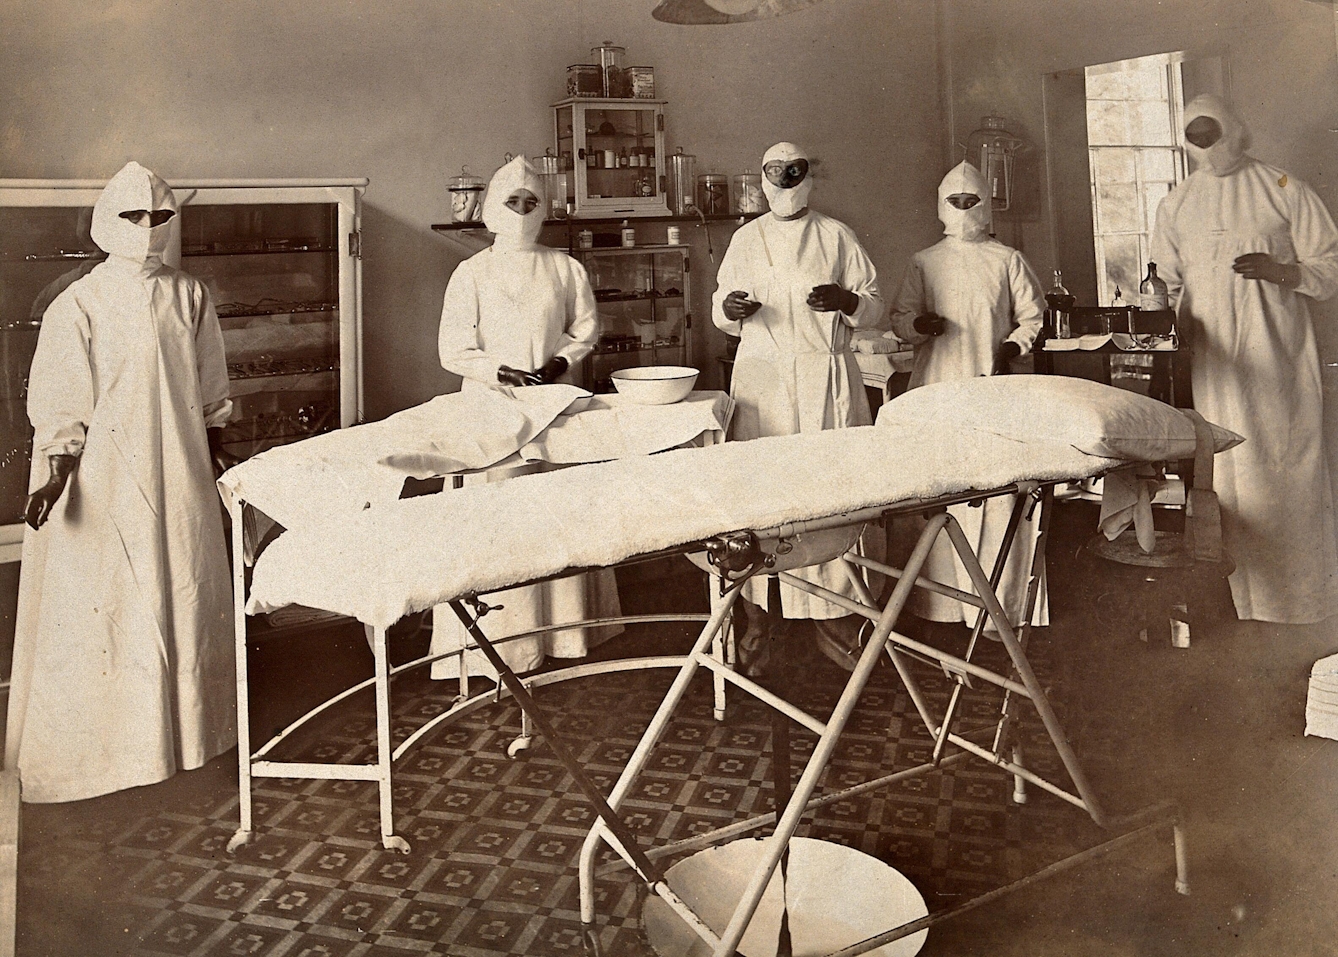 Sepia photograph of an operating theatre in a small tool with various cabinets and apparatus in the background and five medical professionals wearing robes, gloves, and with their faces and hair covered.